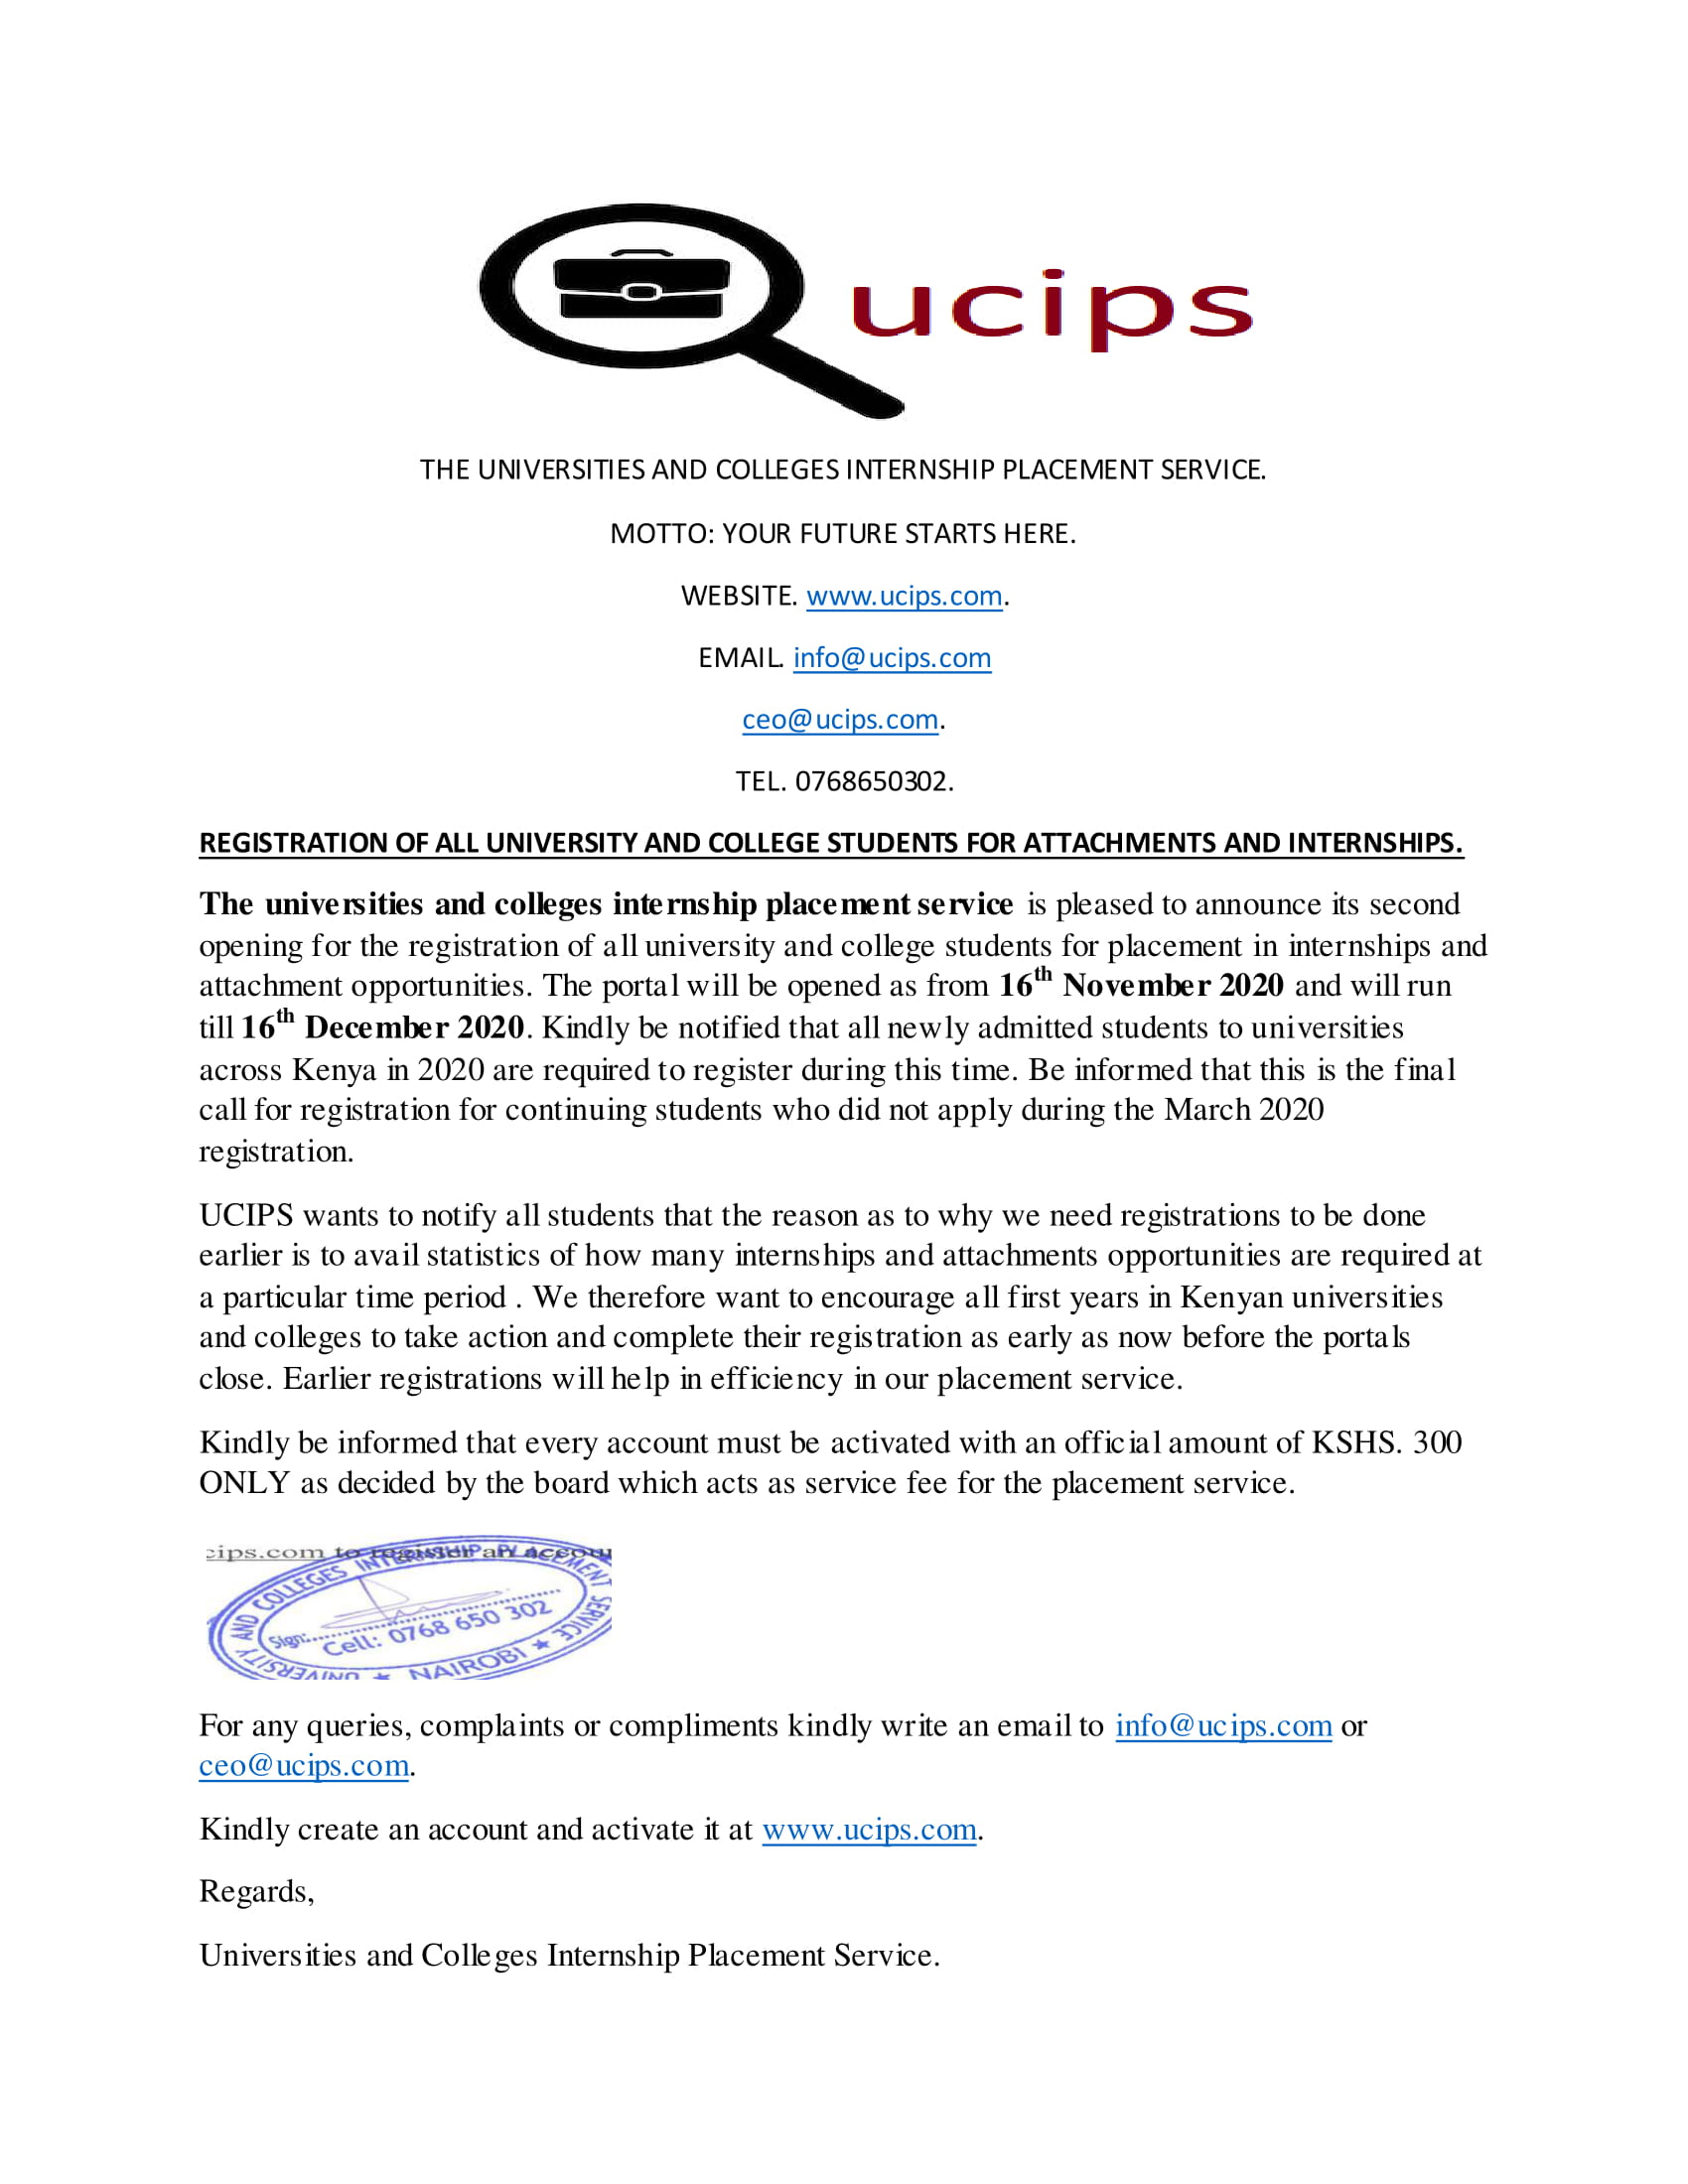 The Universities and Colleges Internship Placement Service